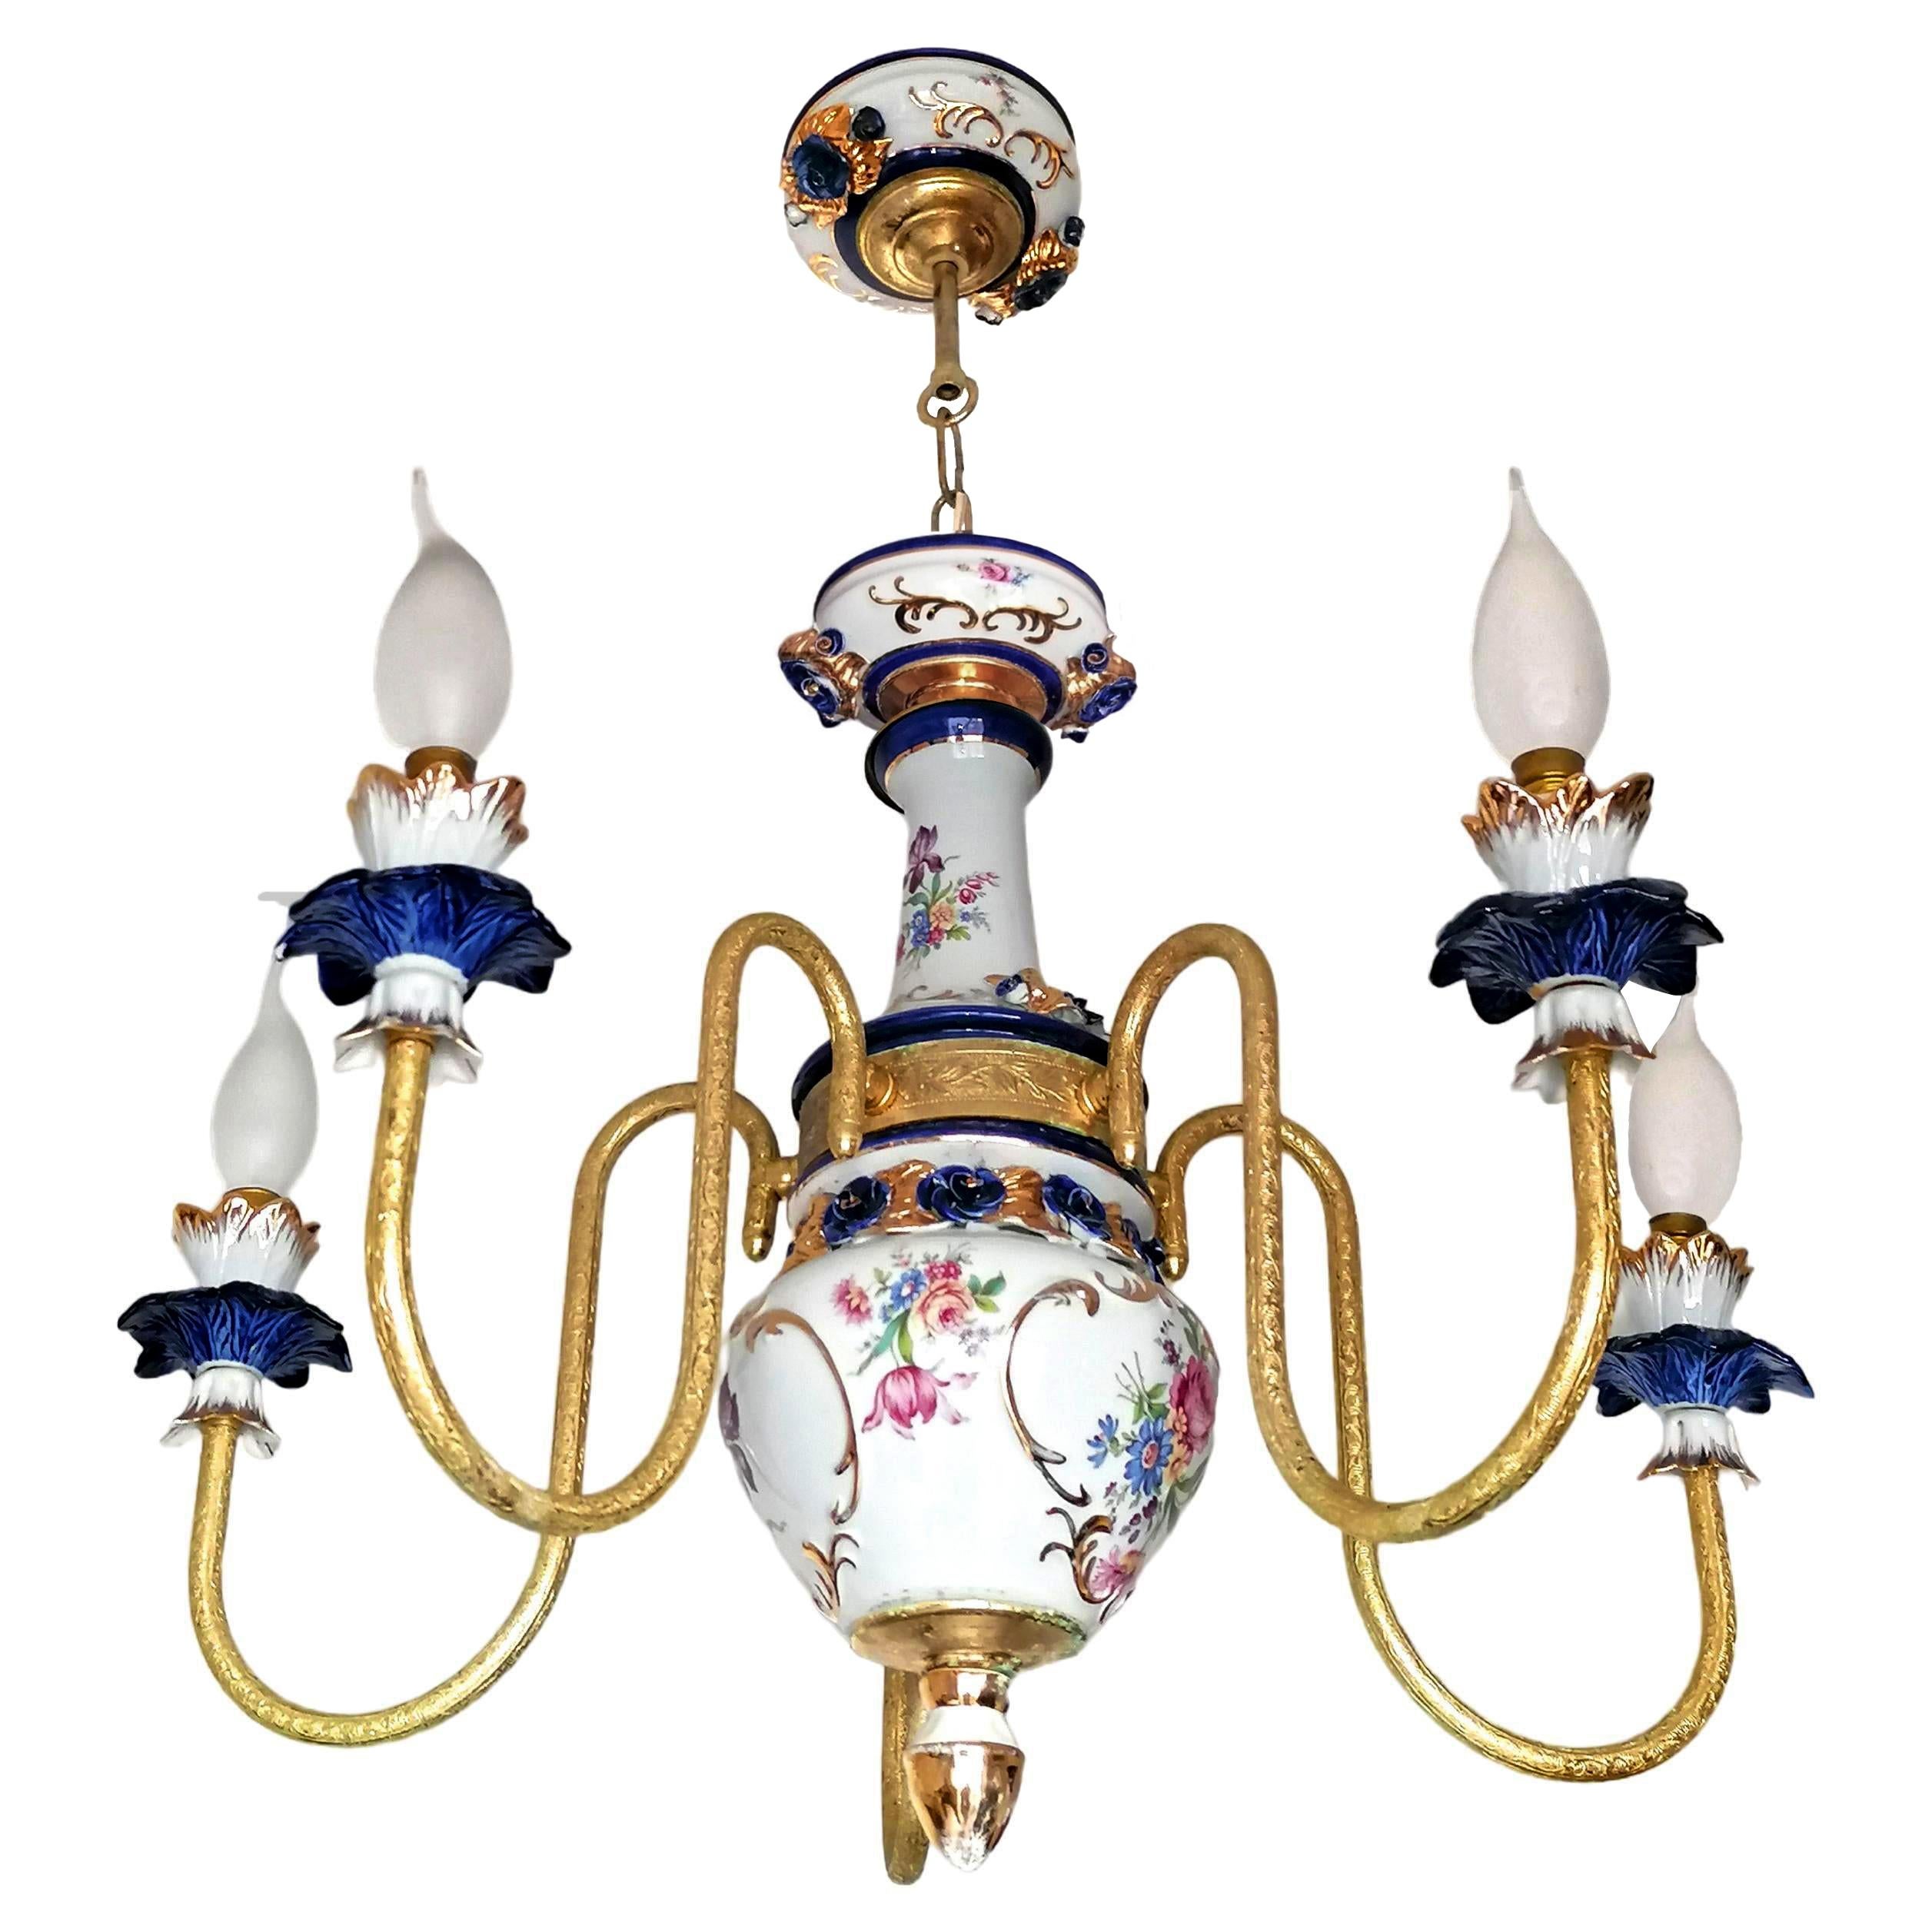 Gorgeous Pair of French Limoges Style Gilt Chandelier in Pink & Blue Porcelain In Good Condition For Sale In Coimbra, PT